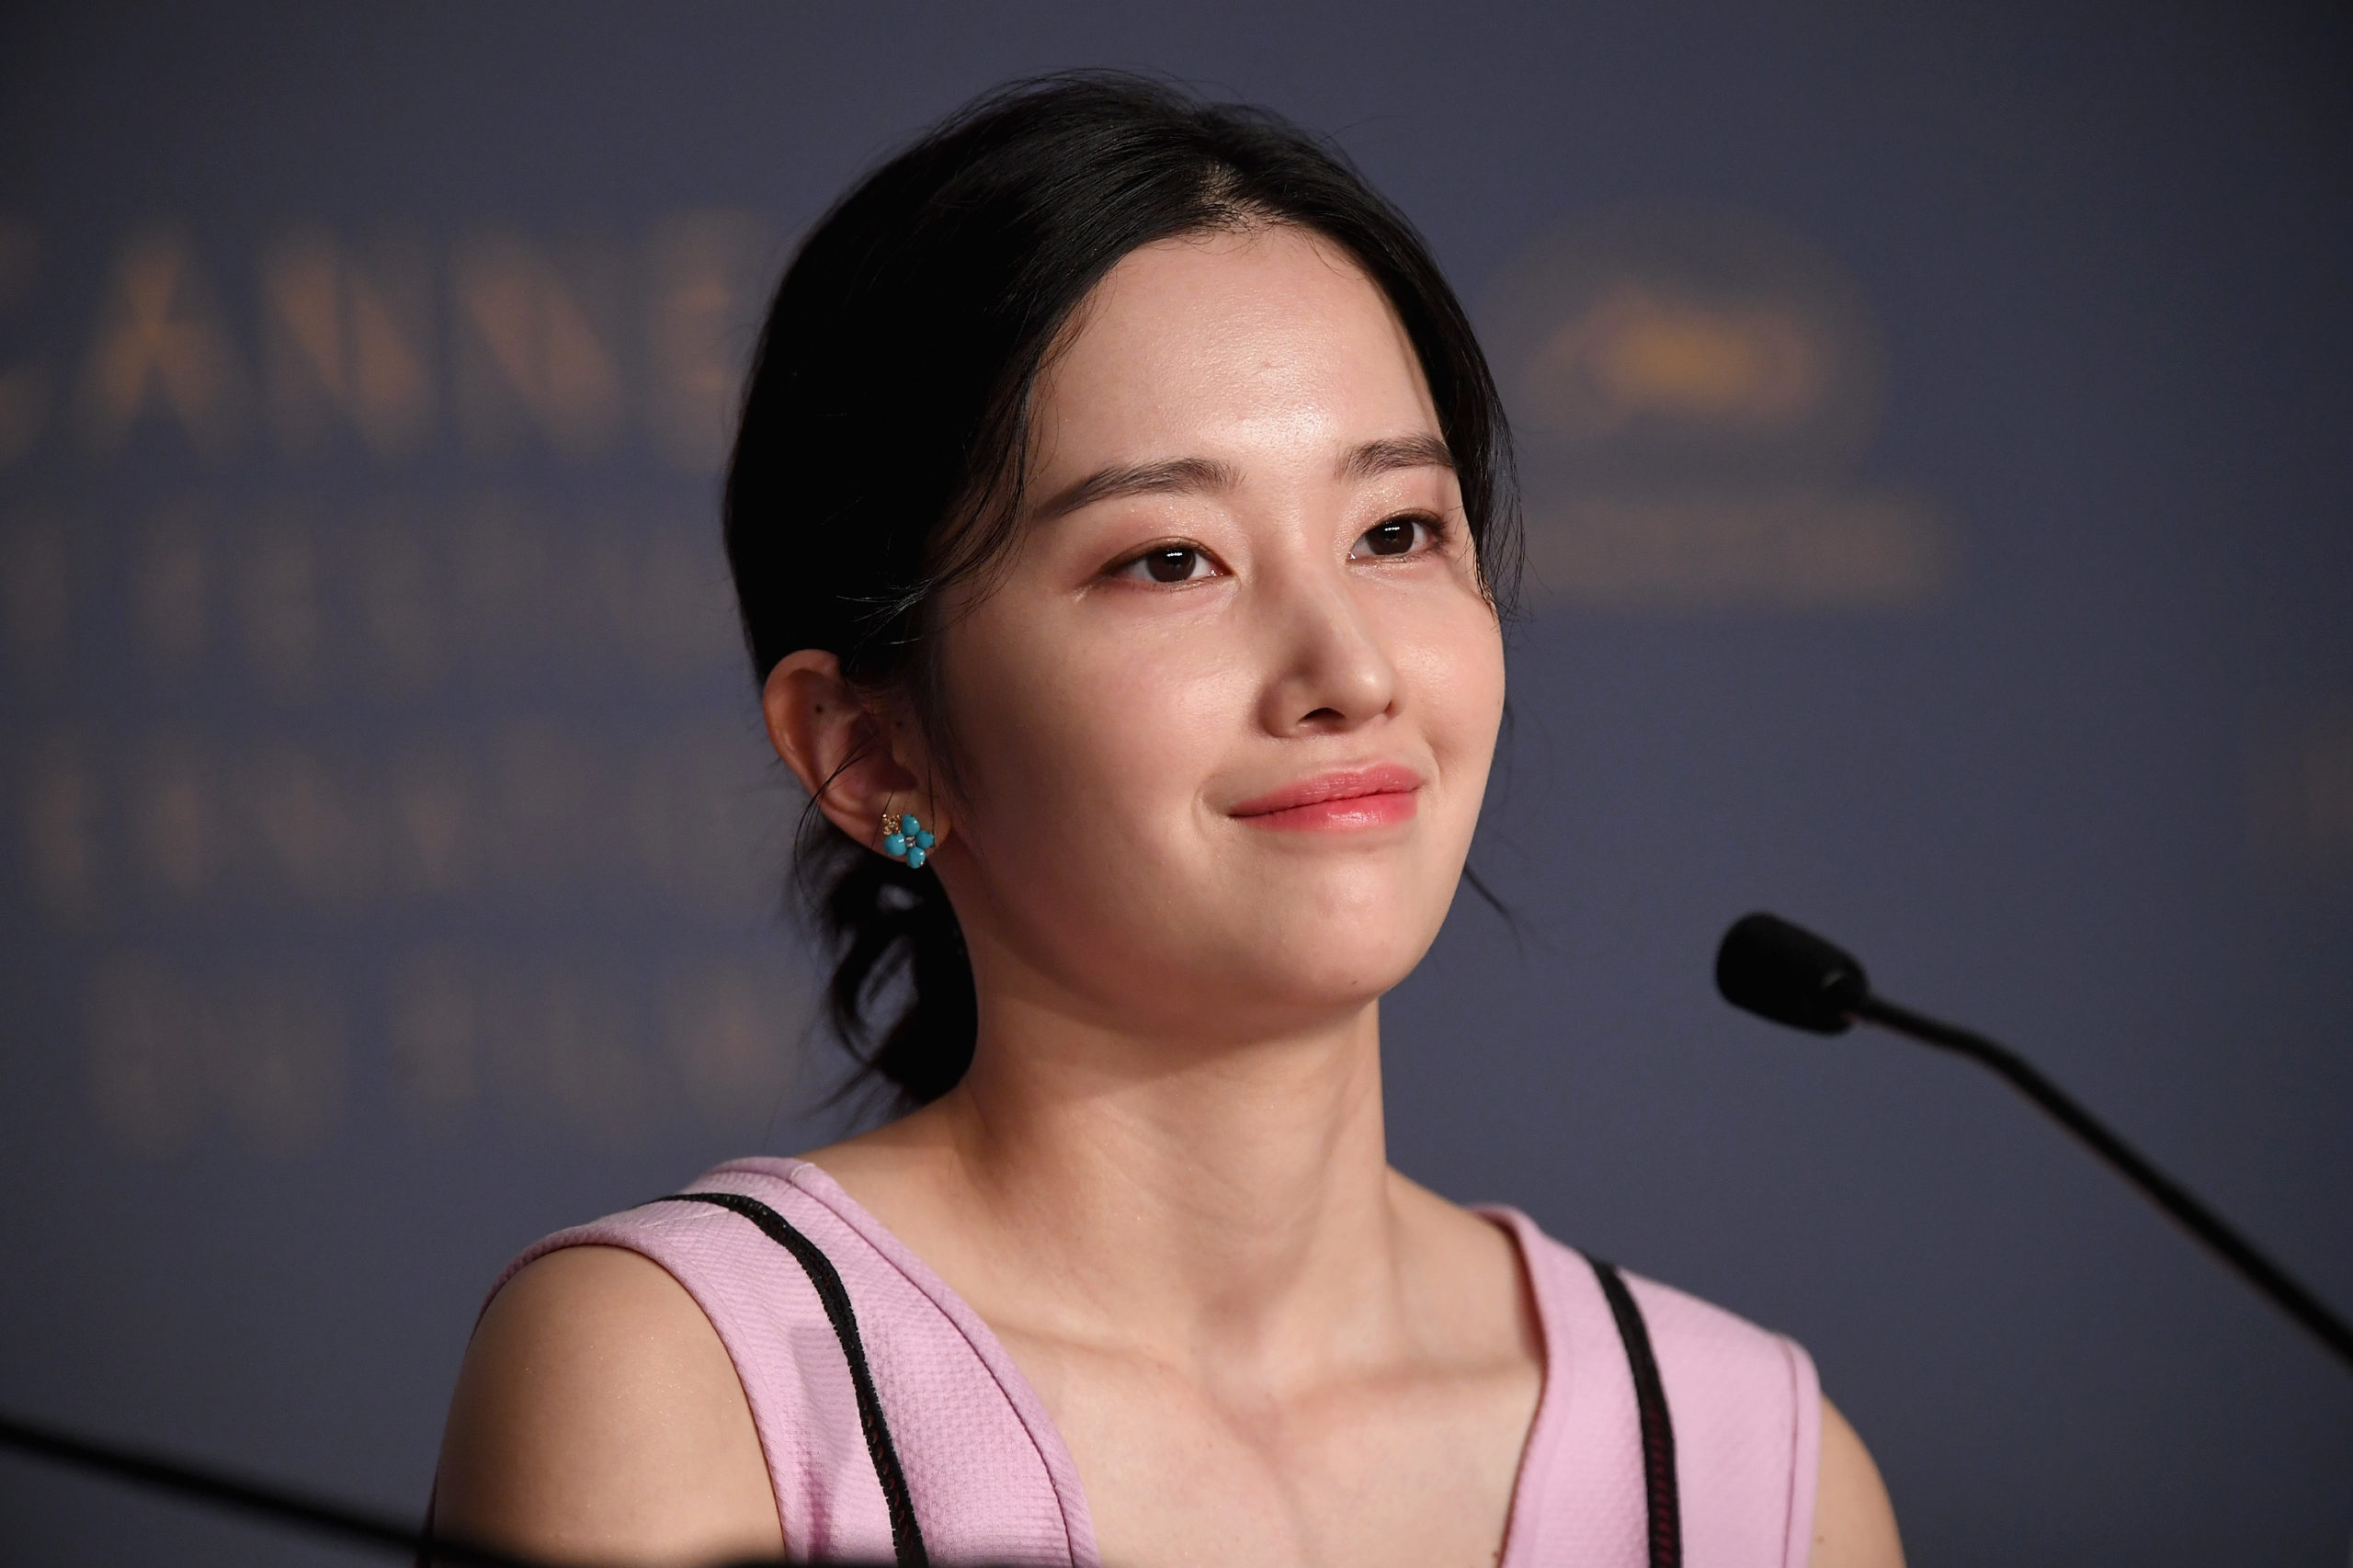 CANNES, FRANCE - MAY 17: Jong-seo Jeon attends the "Burning" Press Conference during the 71st annual Cannes Film Festival at Palais des Festivals on May 17, 2018 in Cannes, France. Getty Images/Getty Images